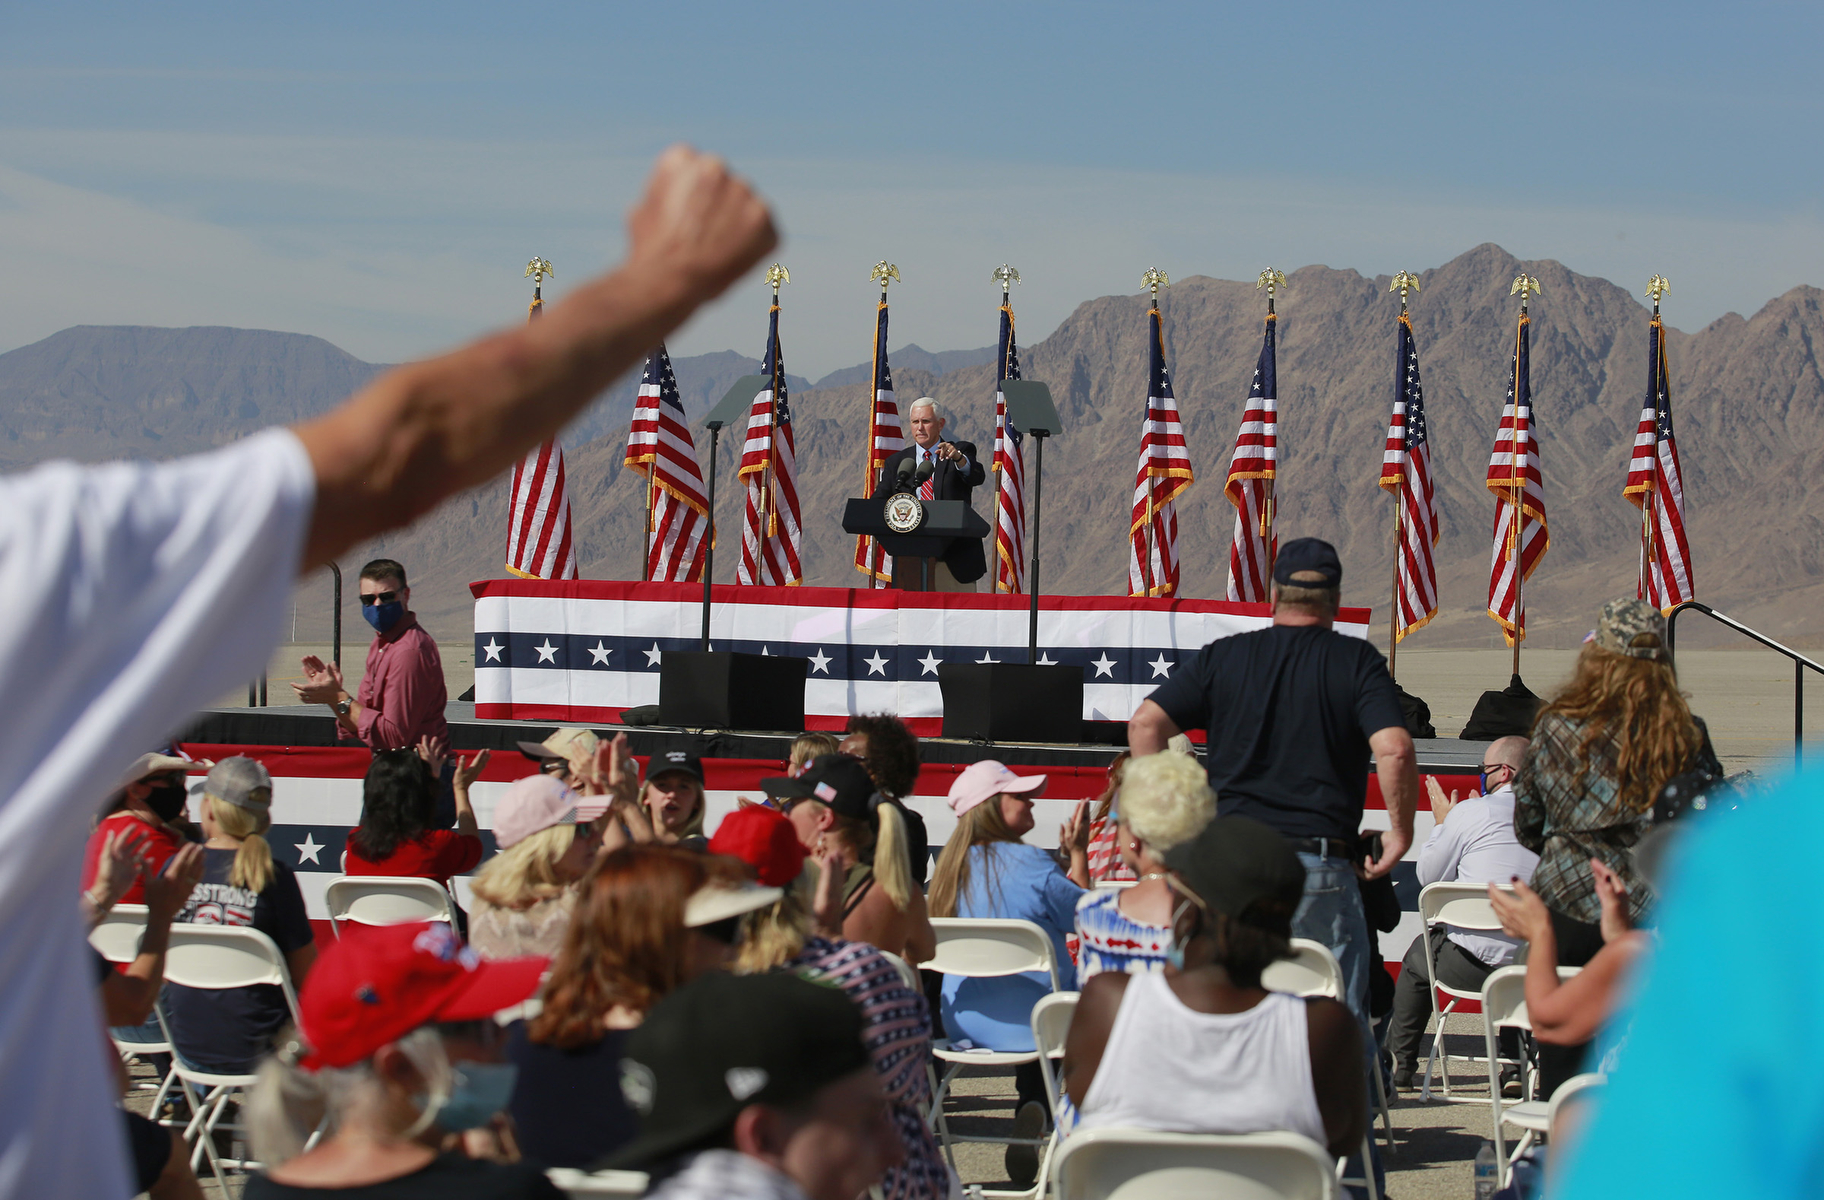 Supporters listen to Vice President Mike Pence speak at a GOP rally Thursday, October 8, 2020, in Boulder City, Nevada. (Photo by Ronda Churchill/AFP)